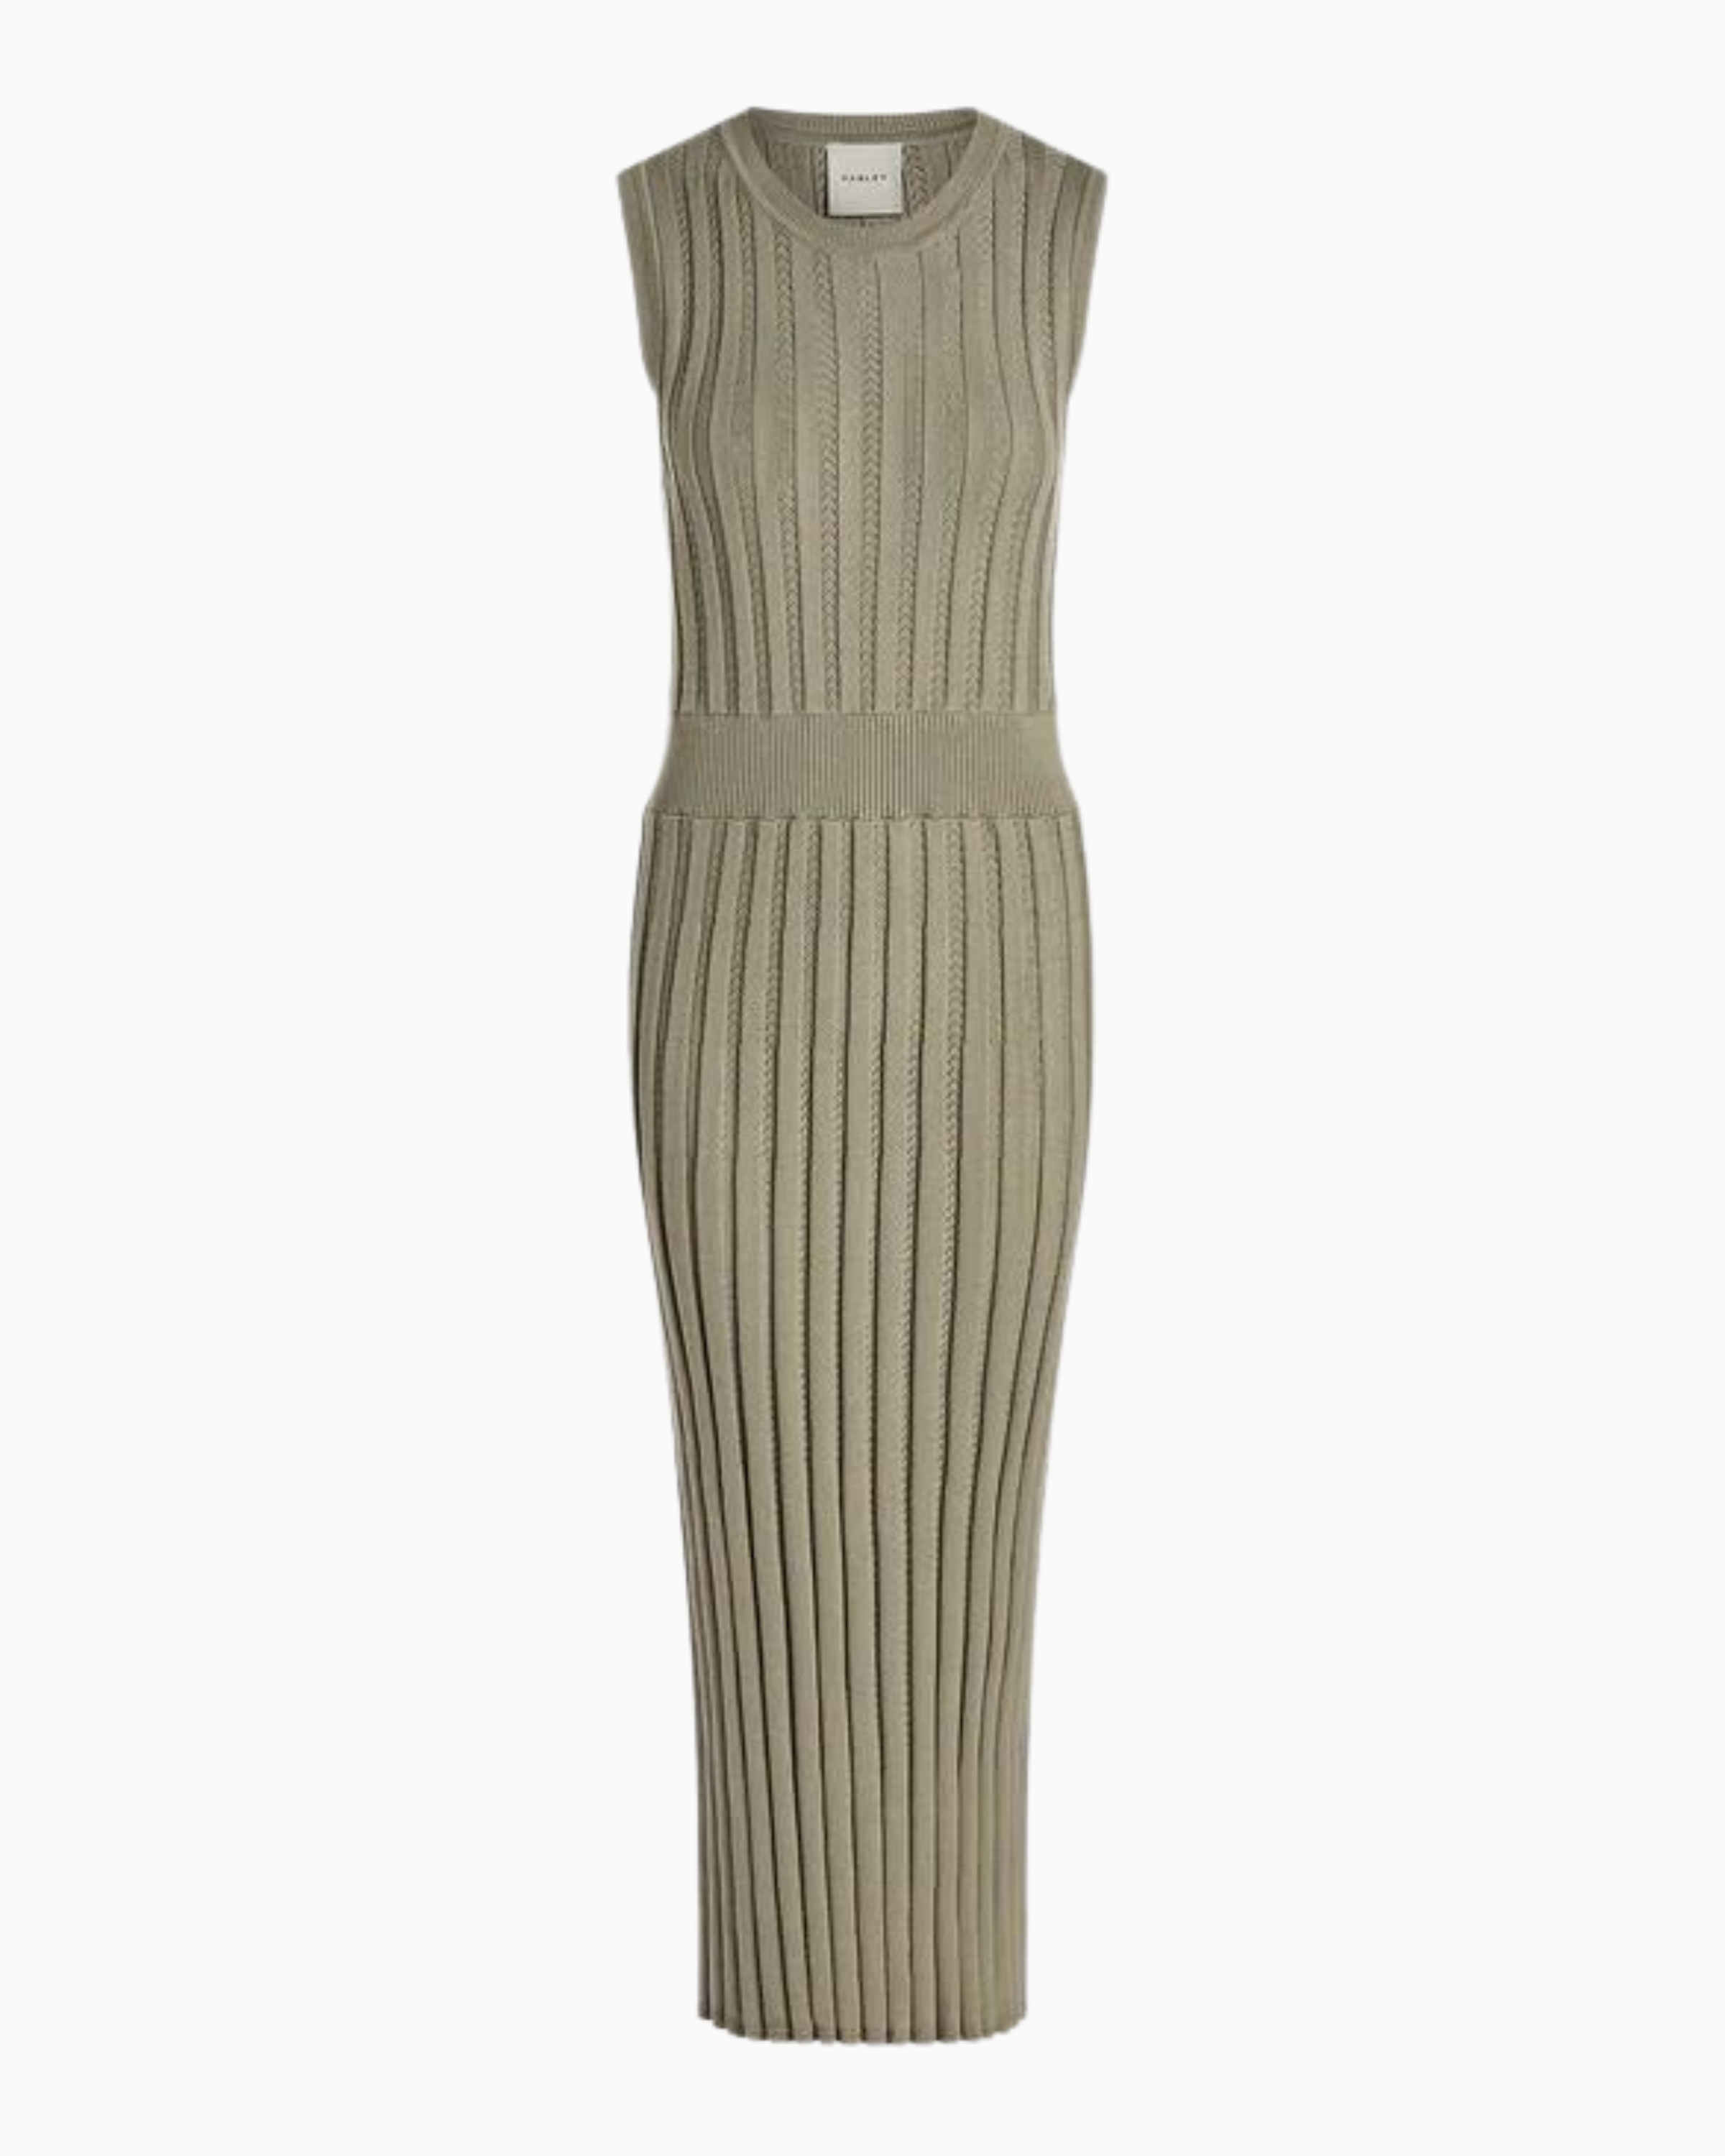 Varley Florian Knit Dress in Seagrass